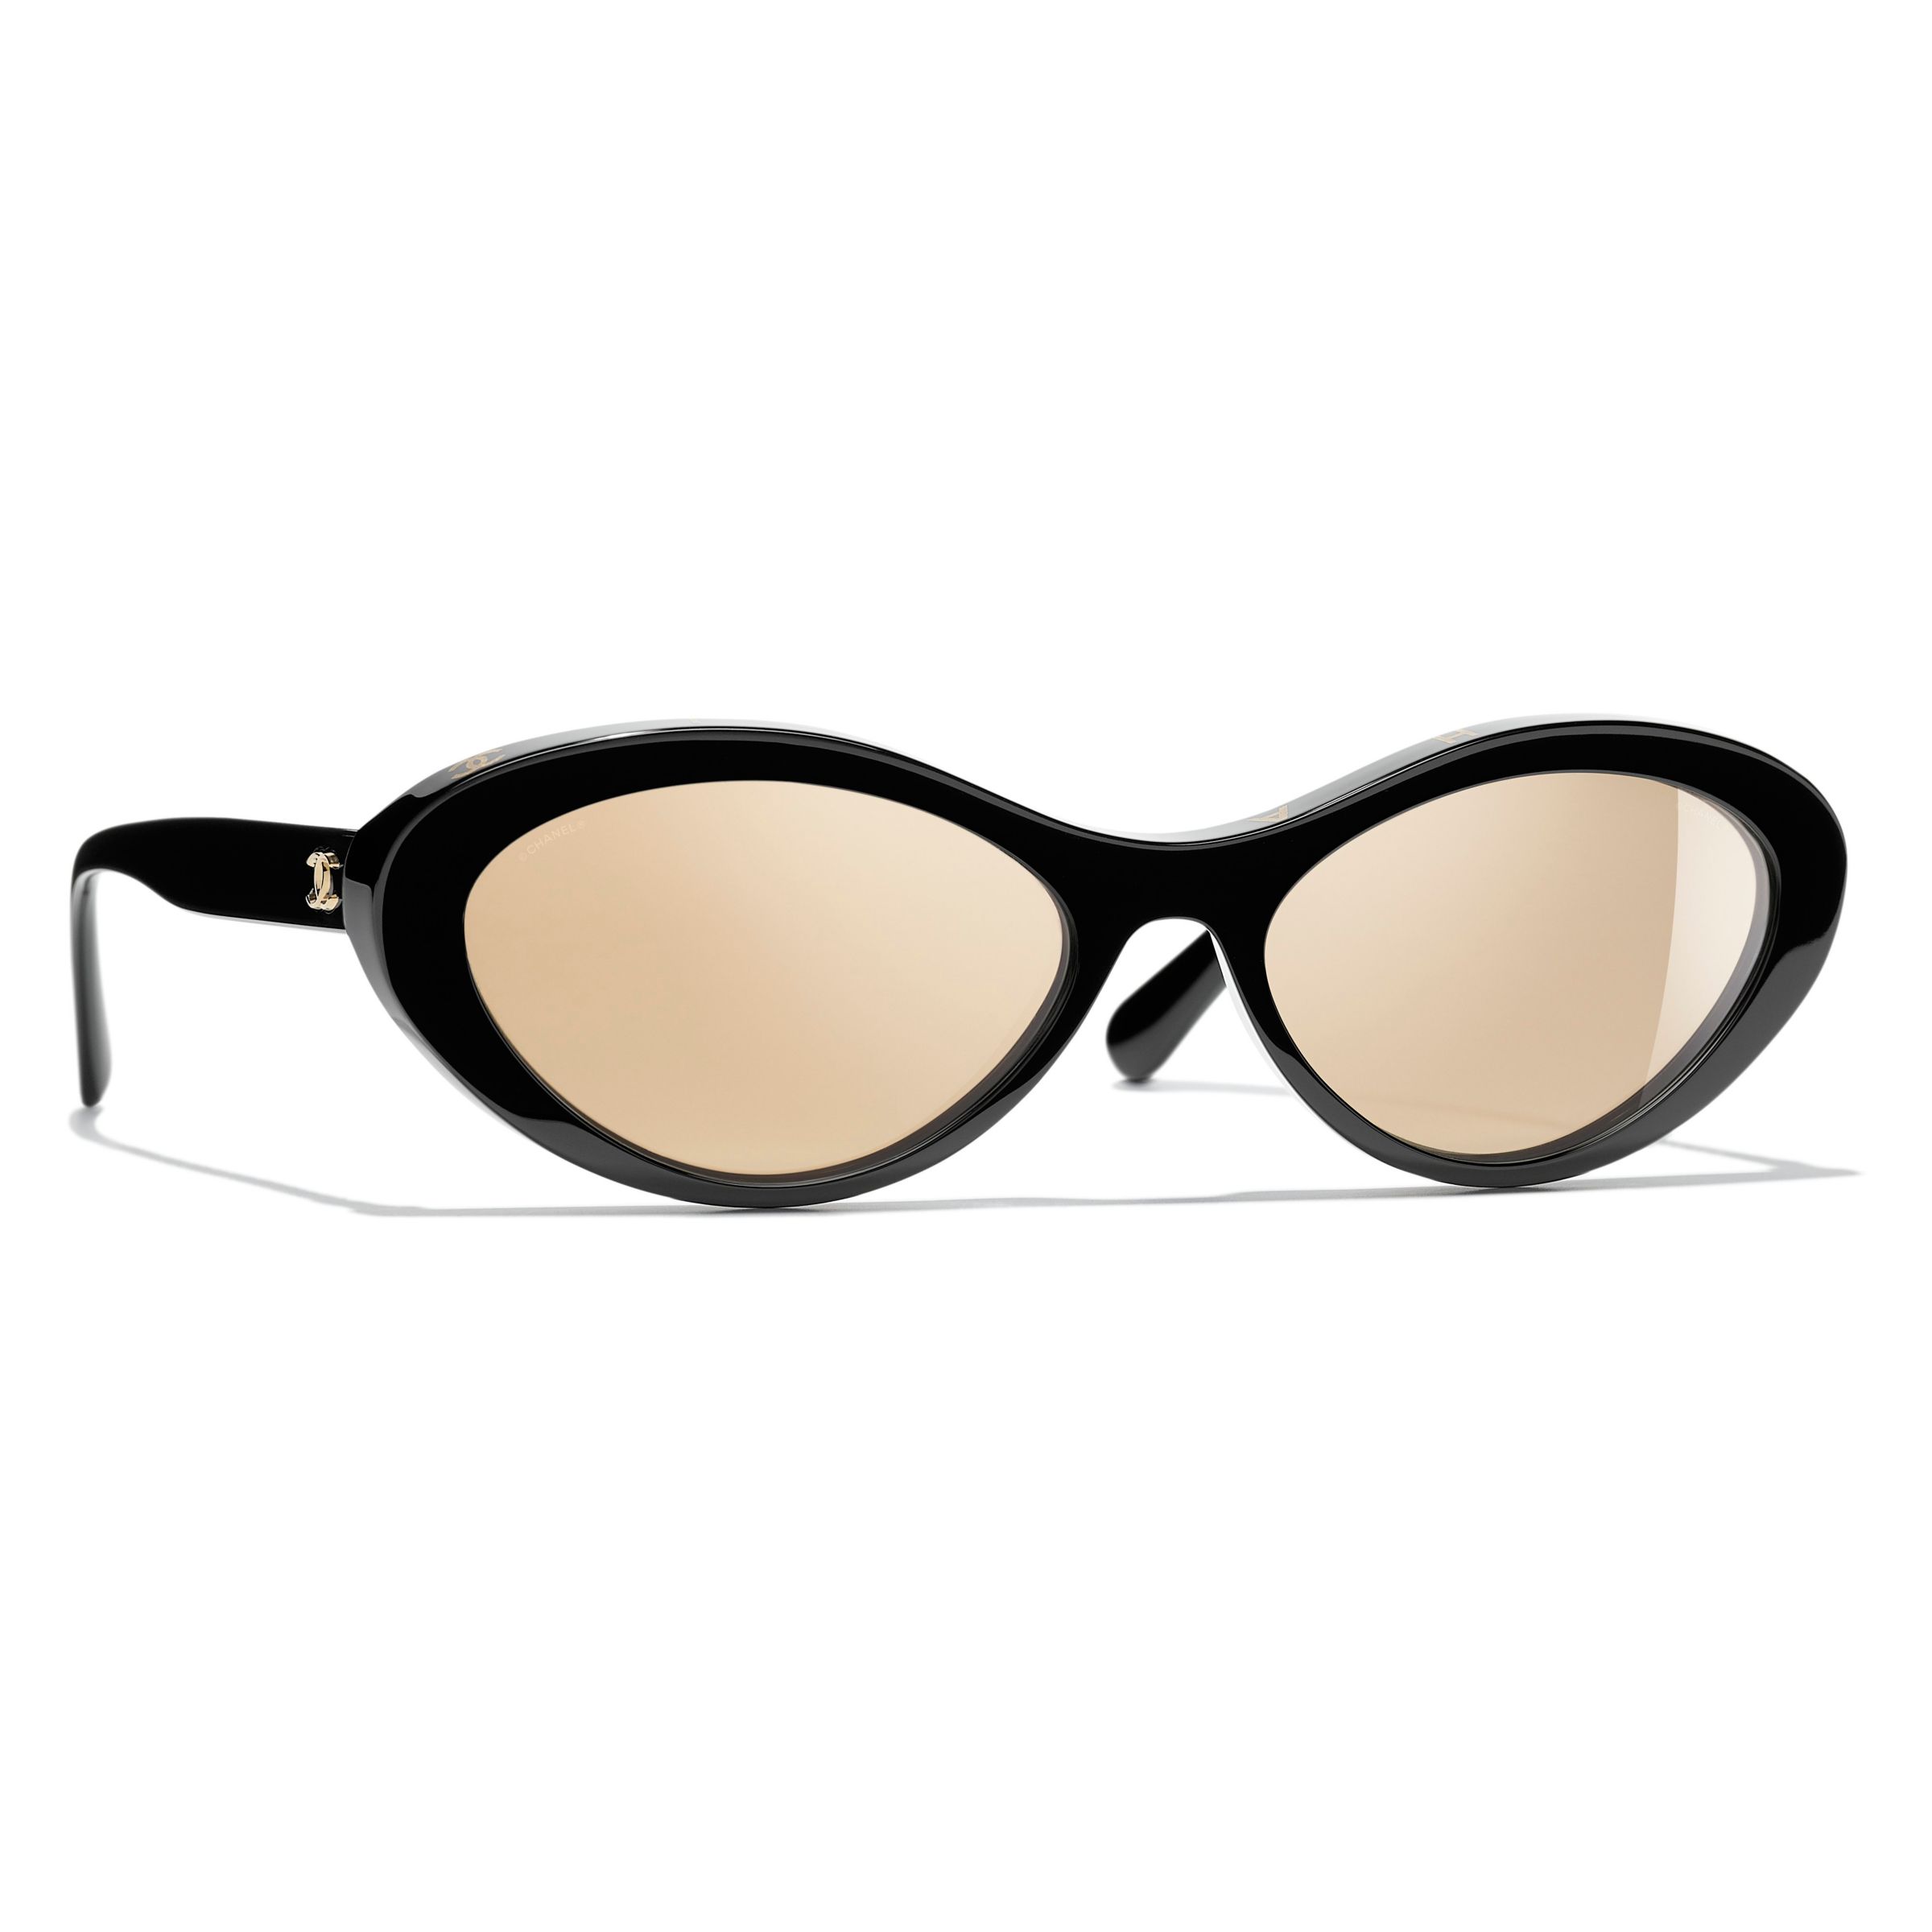 CHANEL Oval Sunglasses CH5416 Polished Black/Beige at John Lewis & Partners